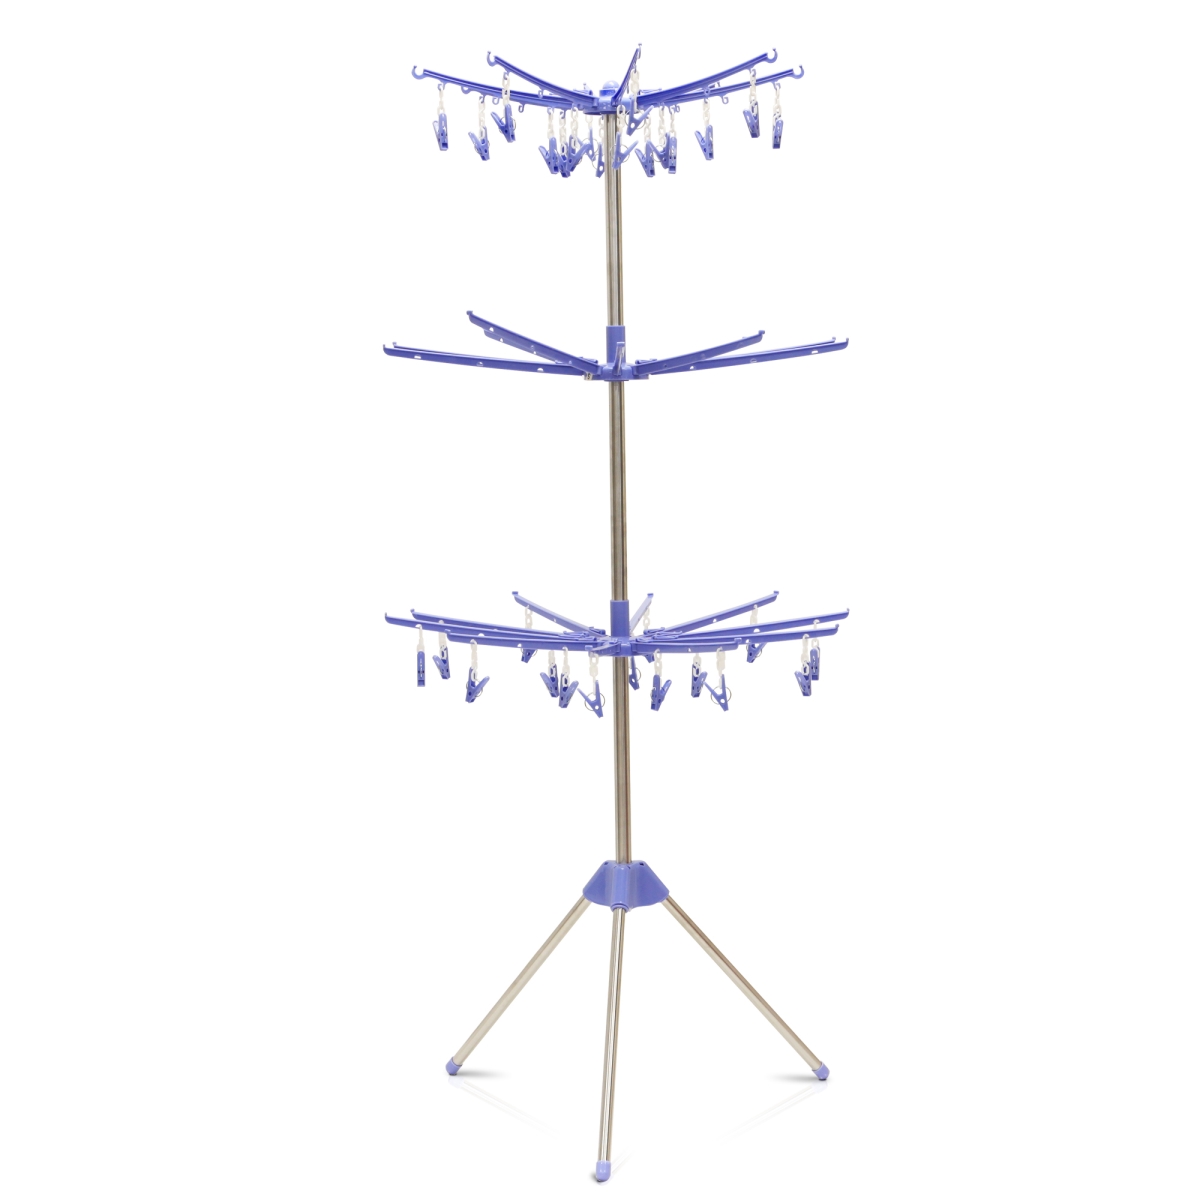 Fnbq-22119bl Yijin Clothes Drying Stand, Blue